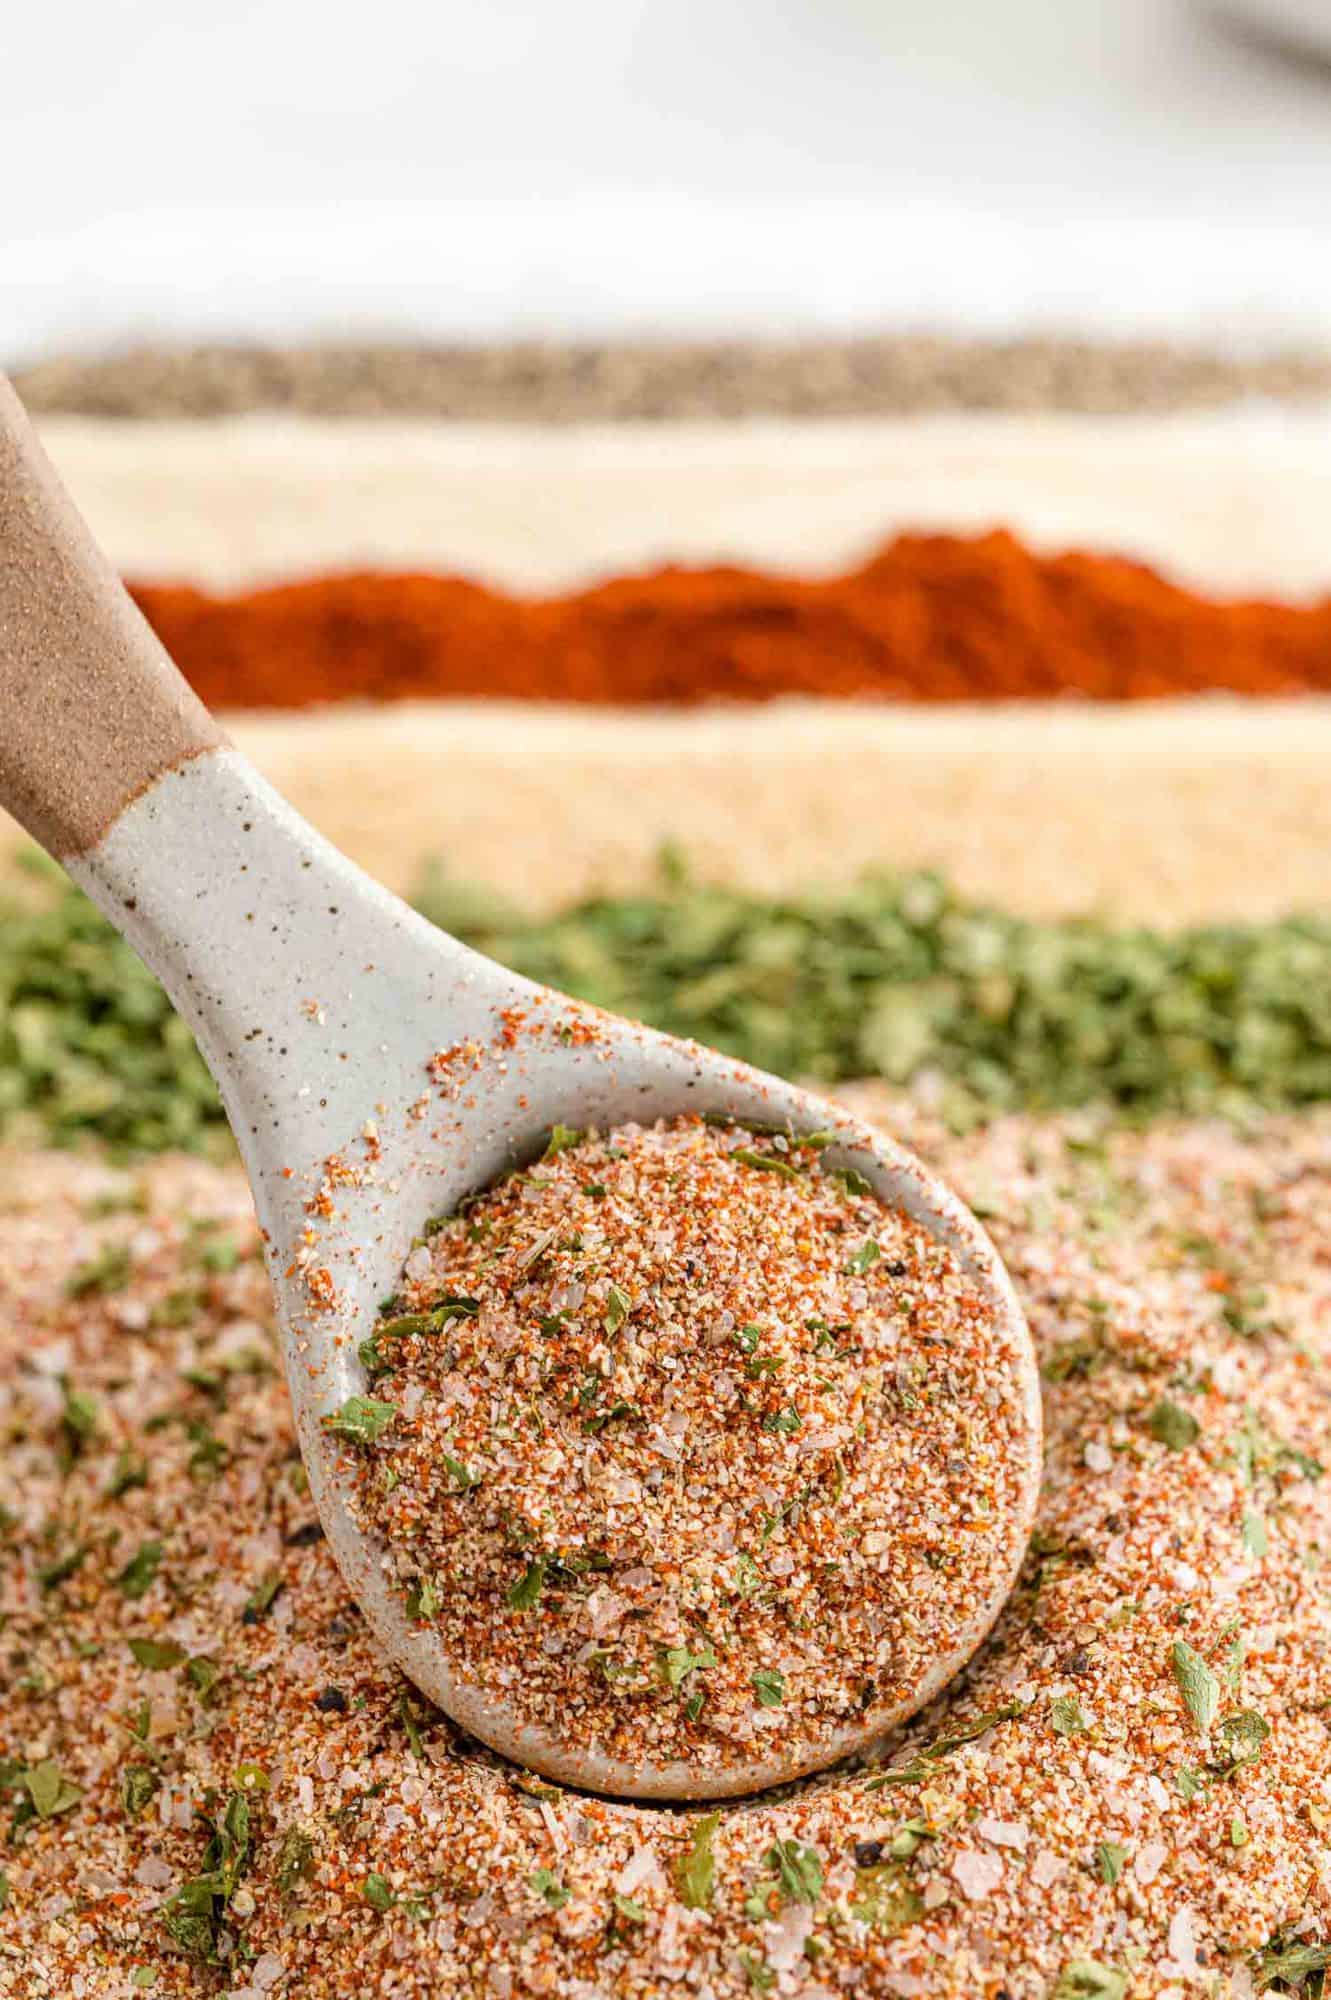 Seasoning mix with separate spices in background.